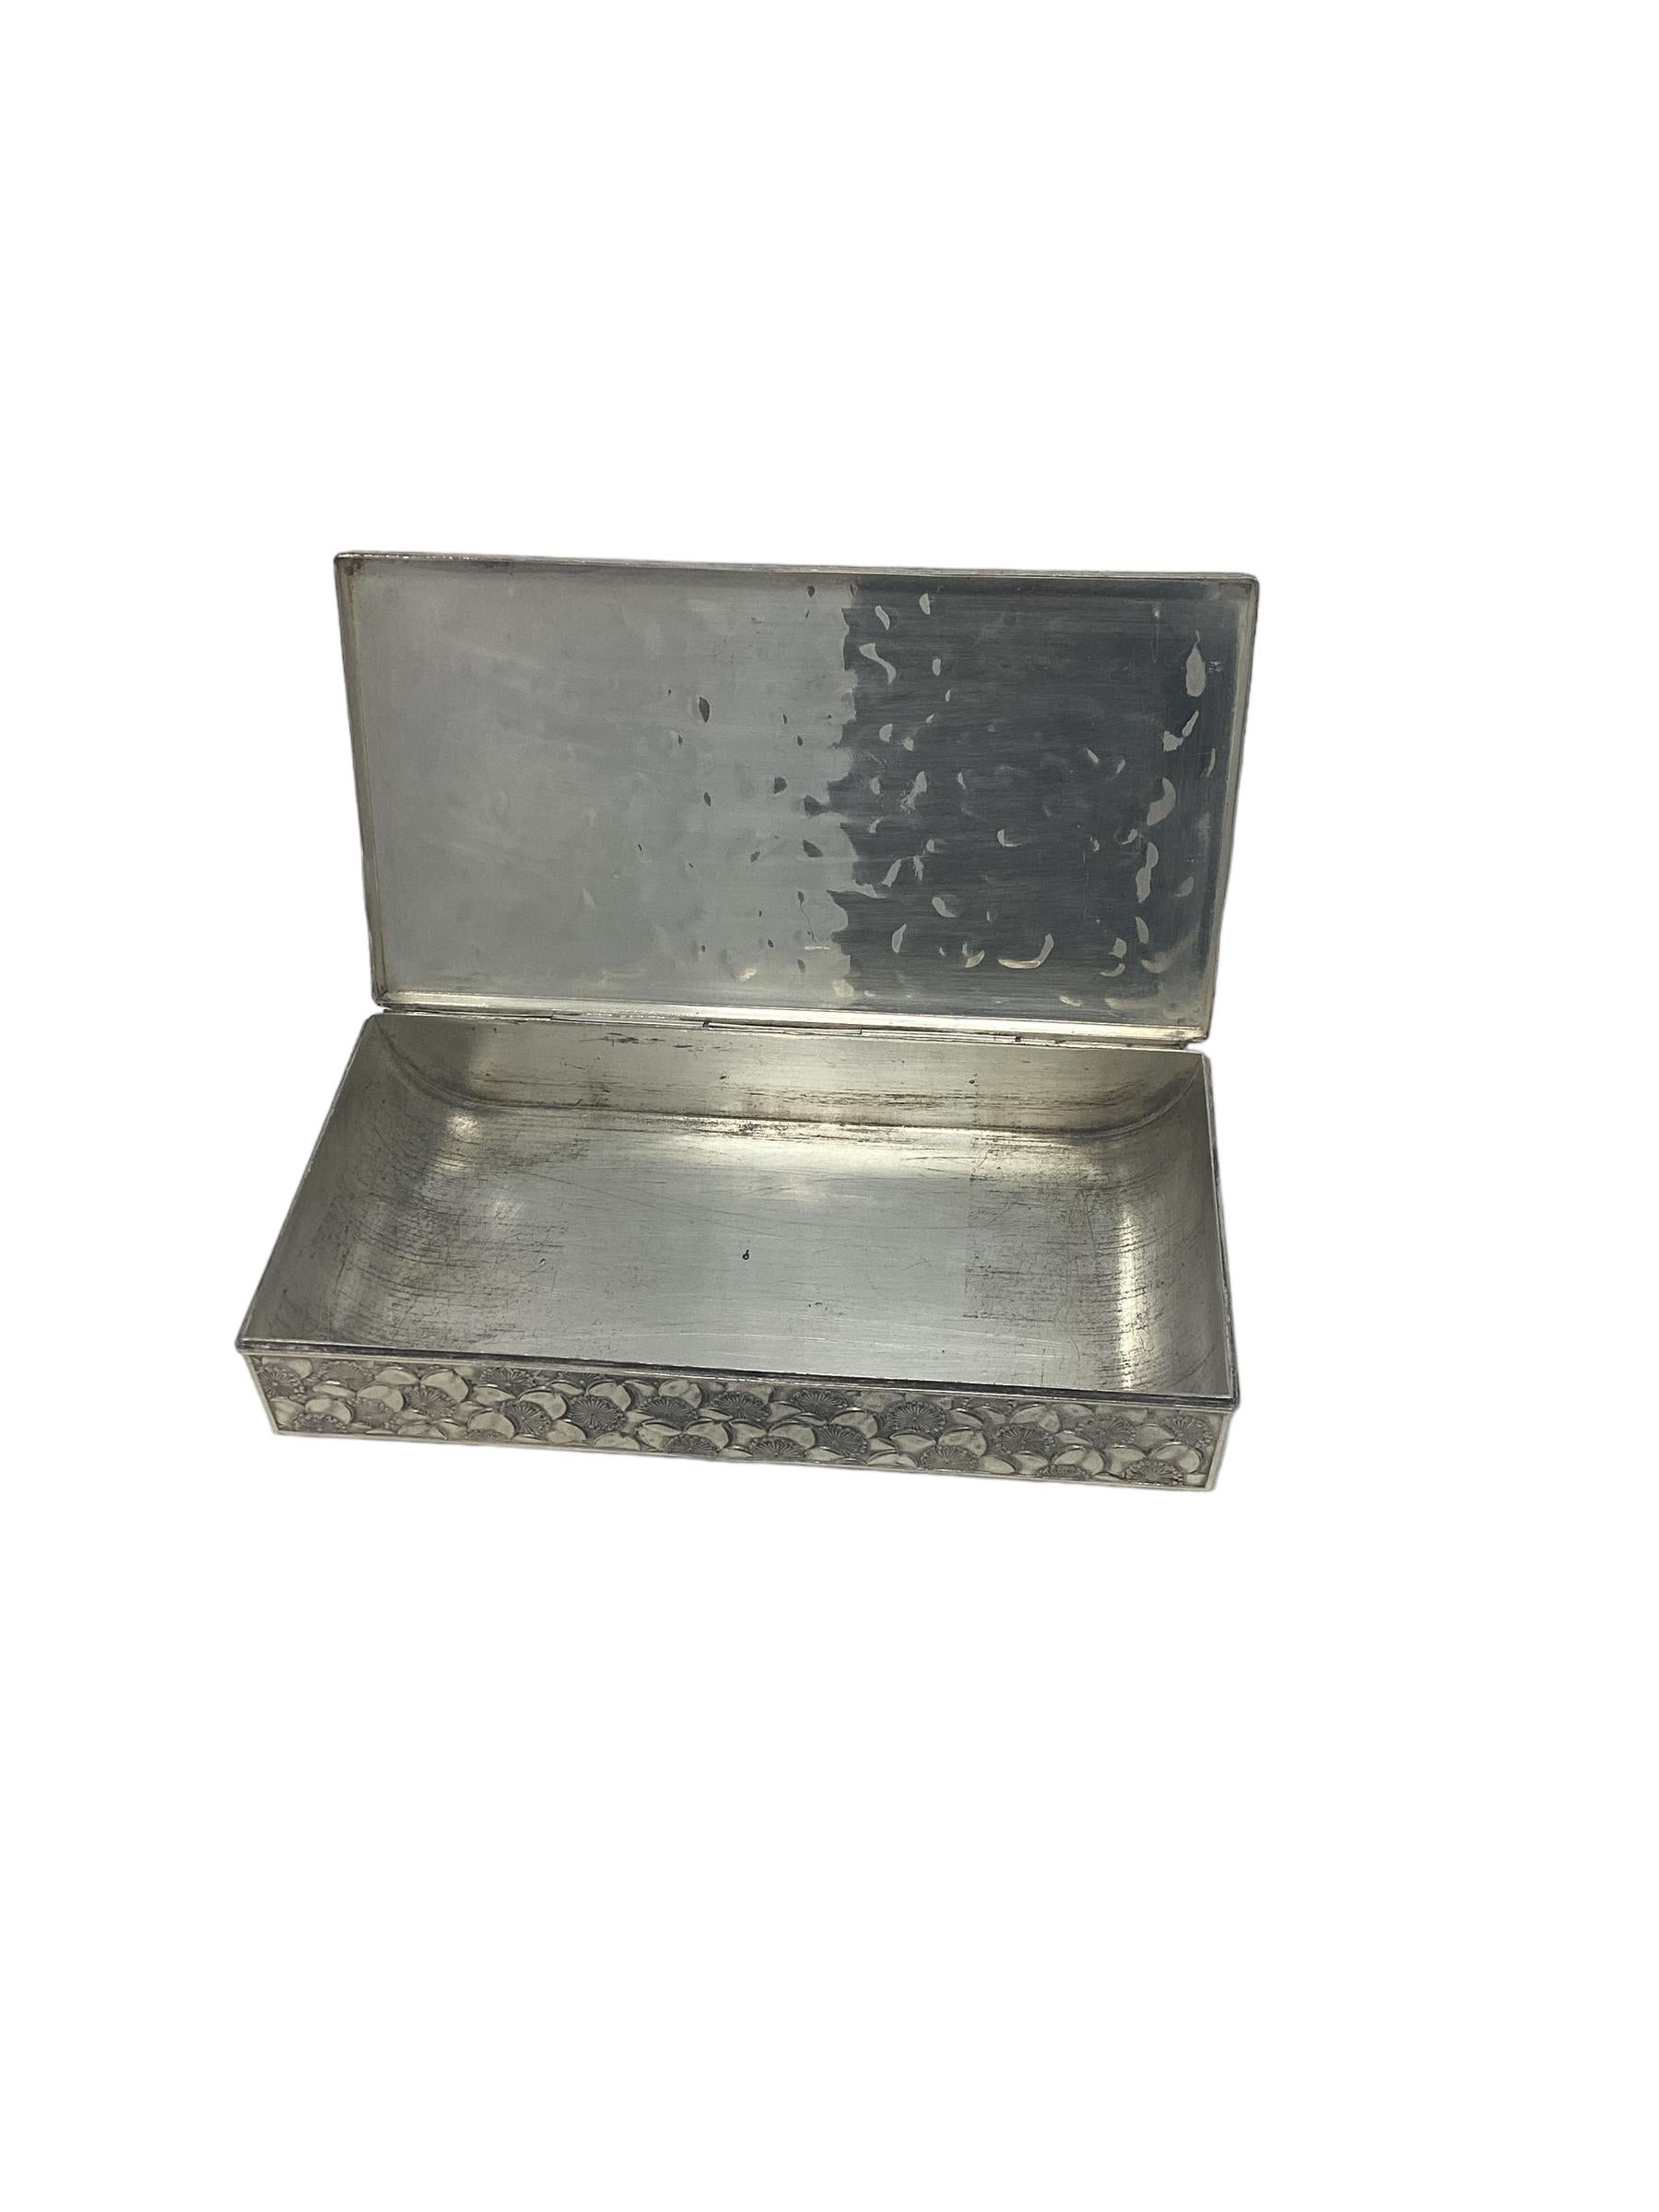 Vintage Christofle Silver Plated Decorative Box In Good Condition For Sale In Chapel Hill, NC